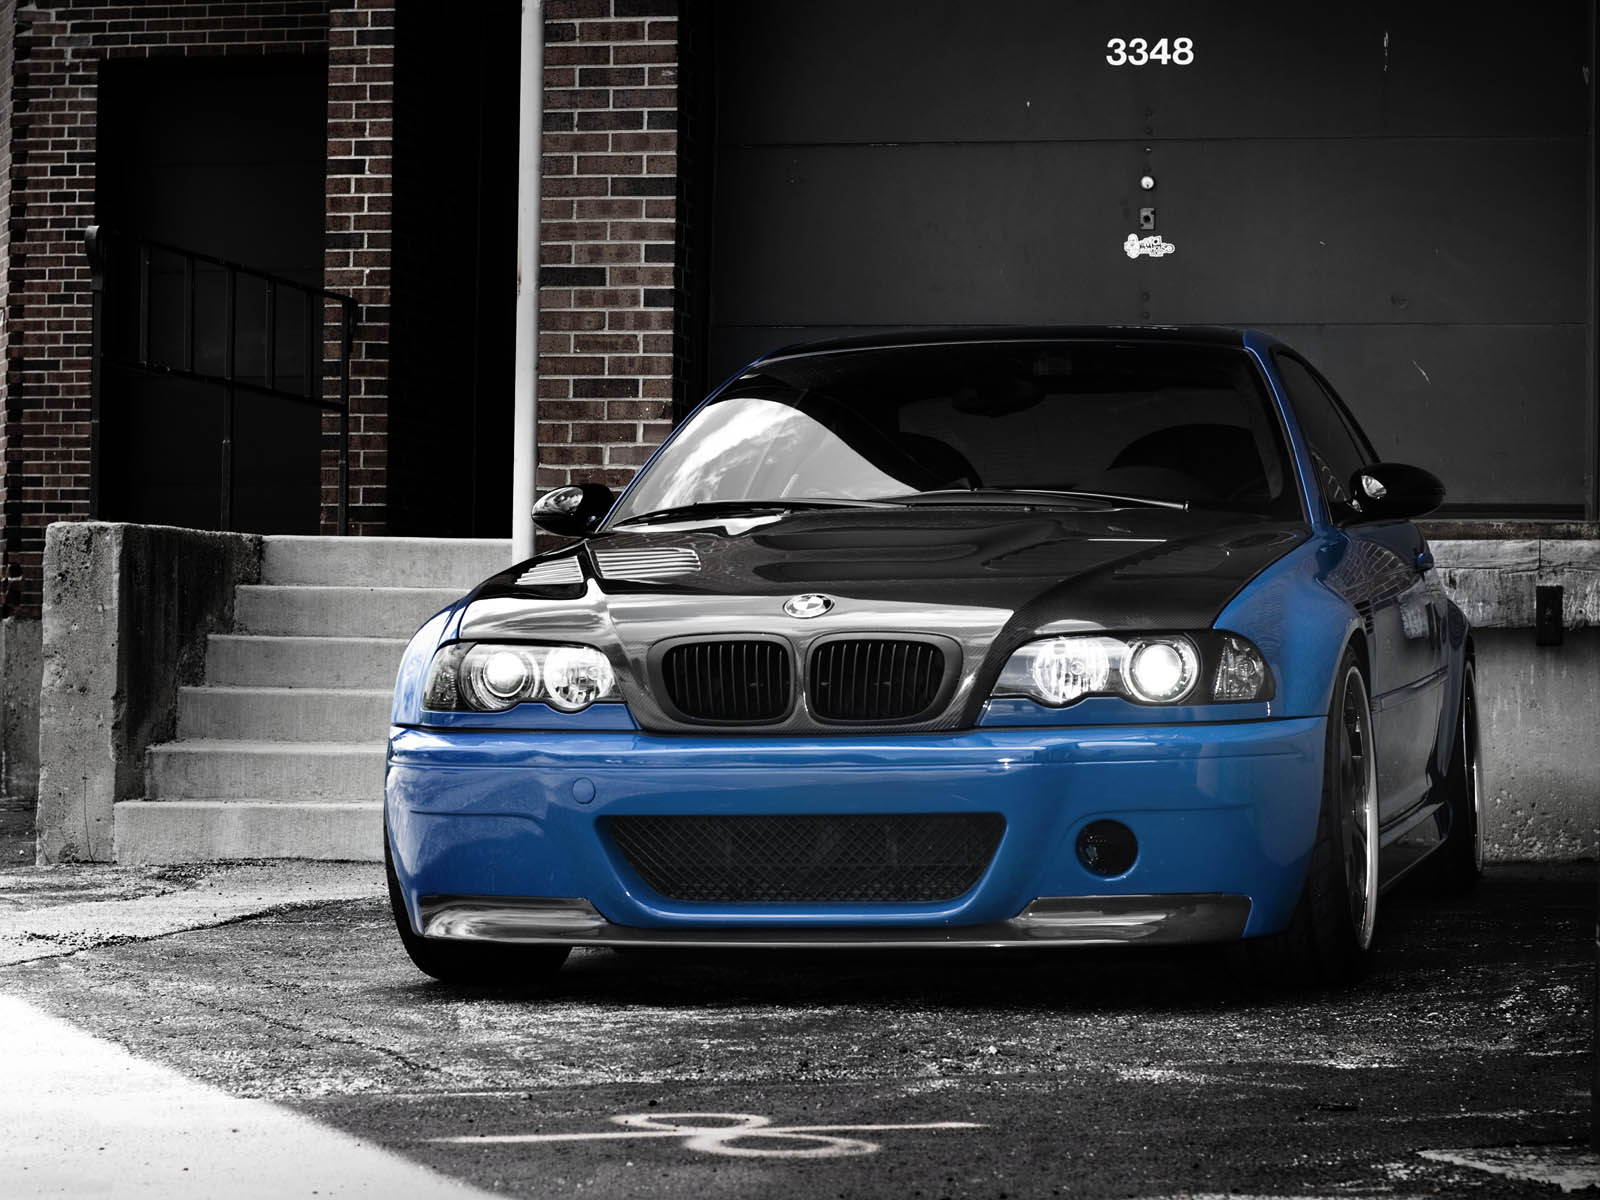 Tag Bmw M3 E46 Csl Car Wallpaper Background Paos Pictures And